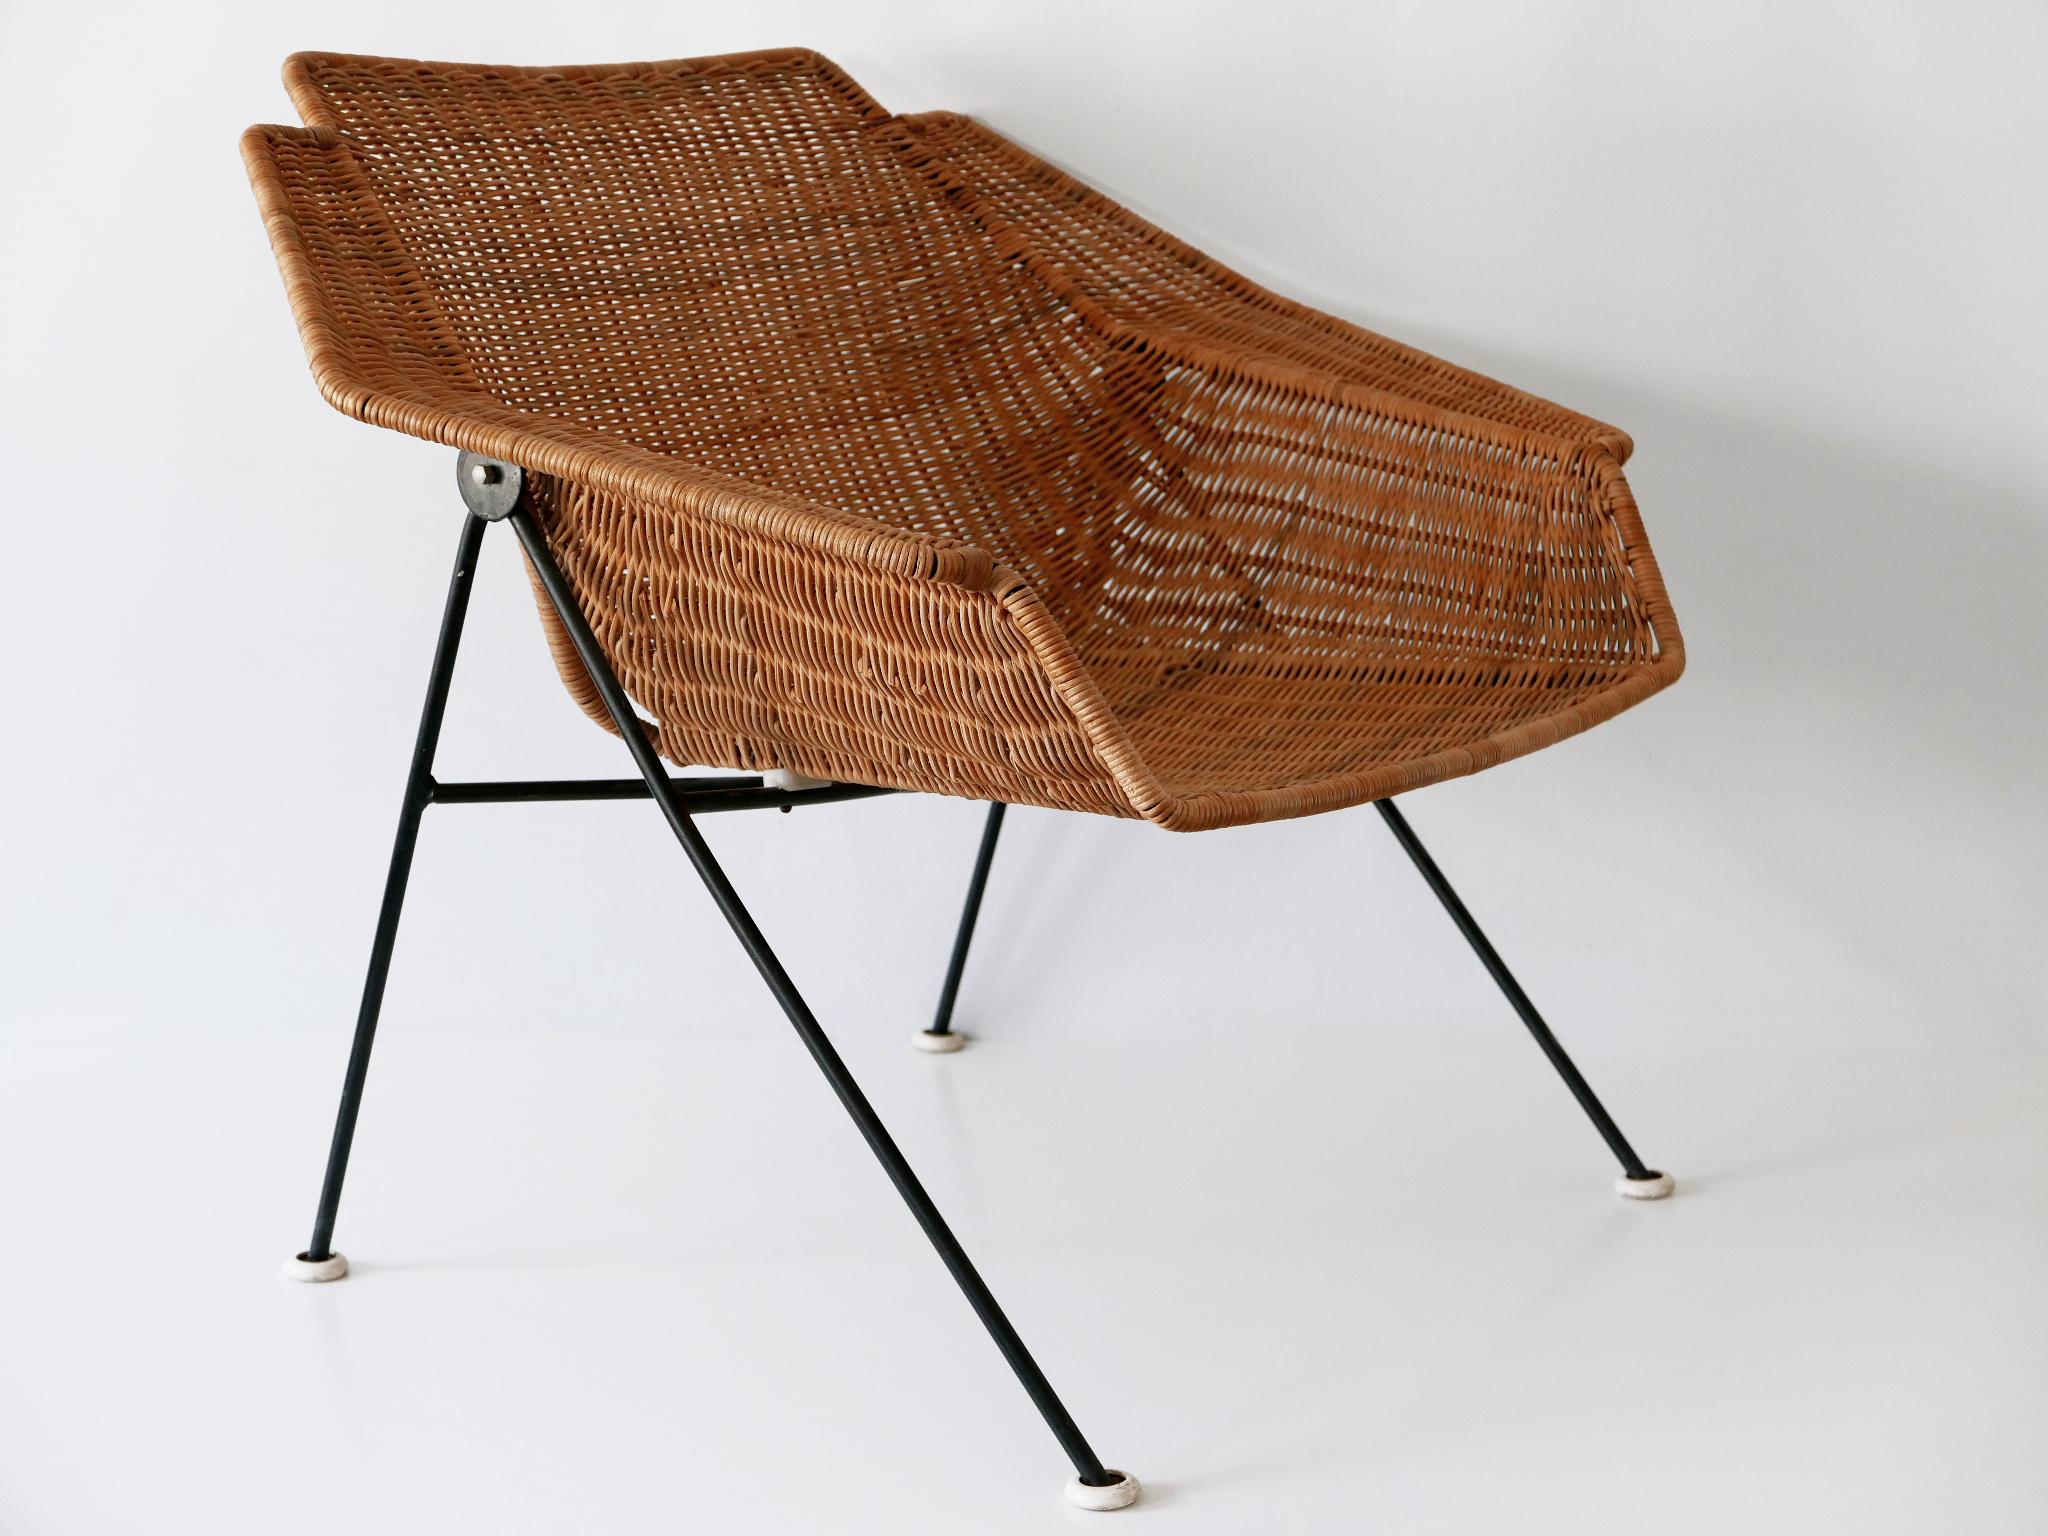 Exceptional Mid-Century Modern Wicker Lounge Chair or Armchair 1950s Sweden For Sale 4